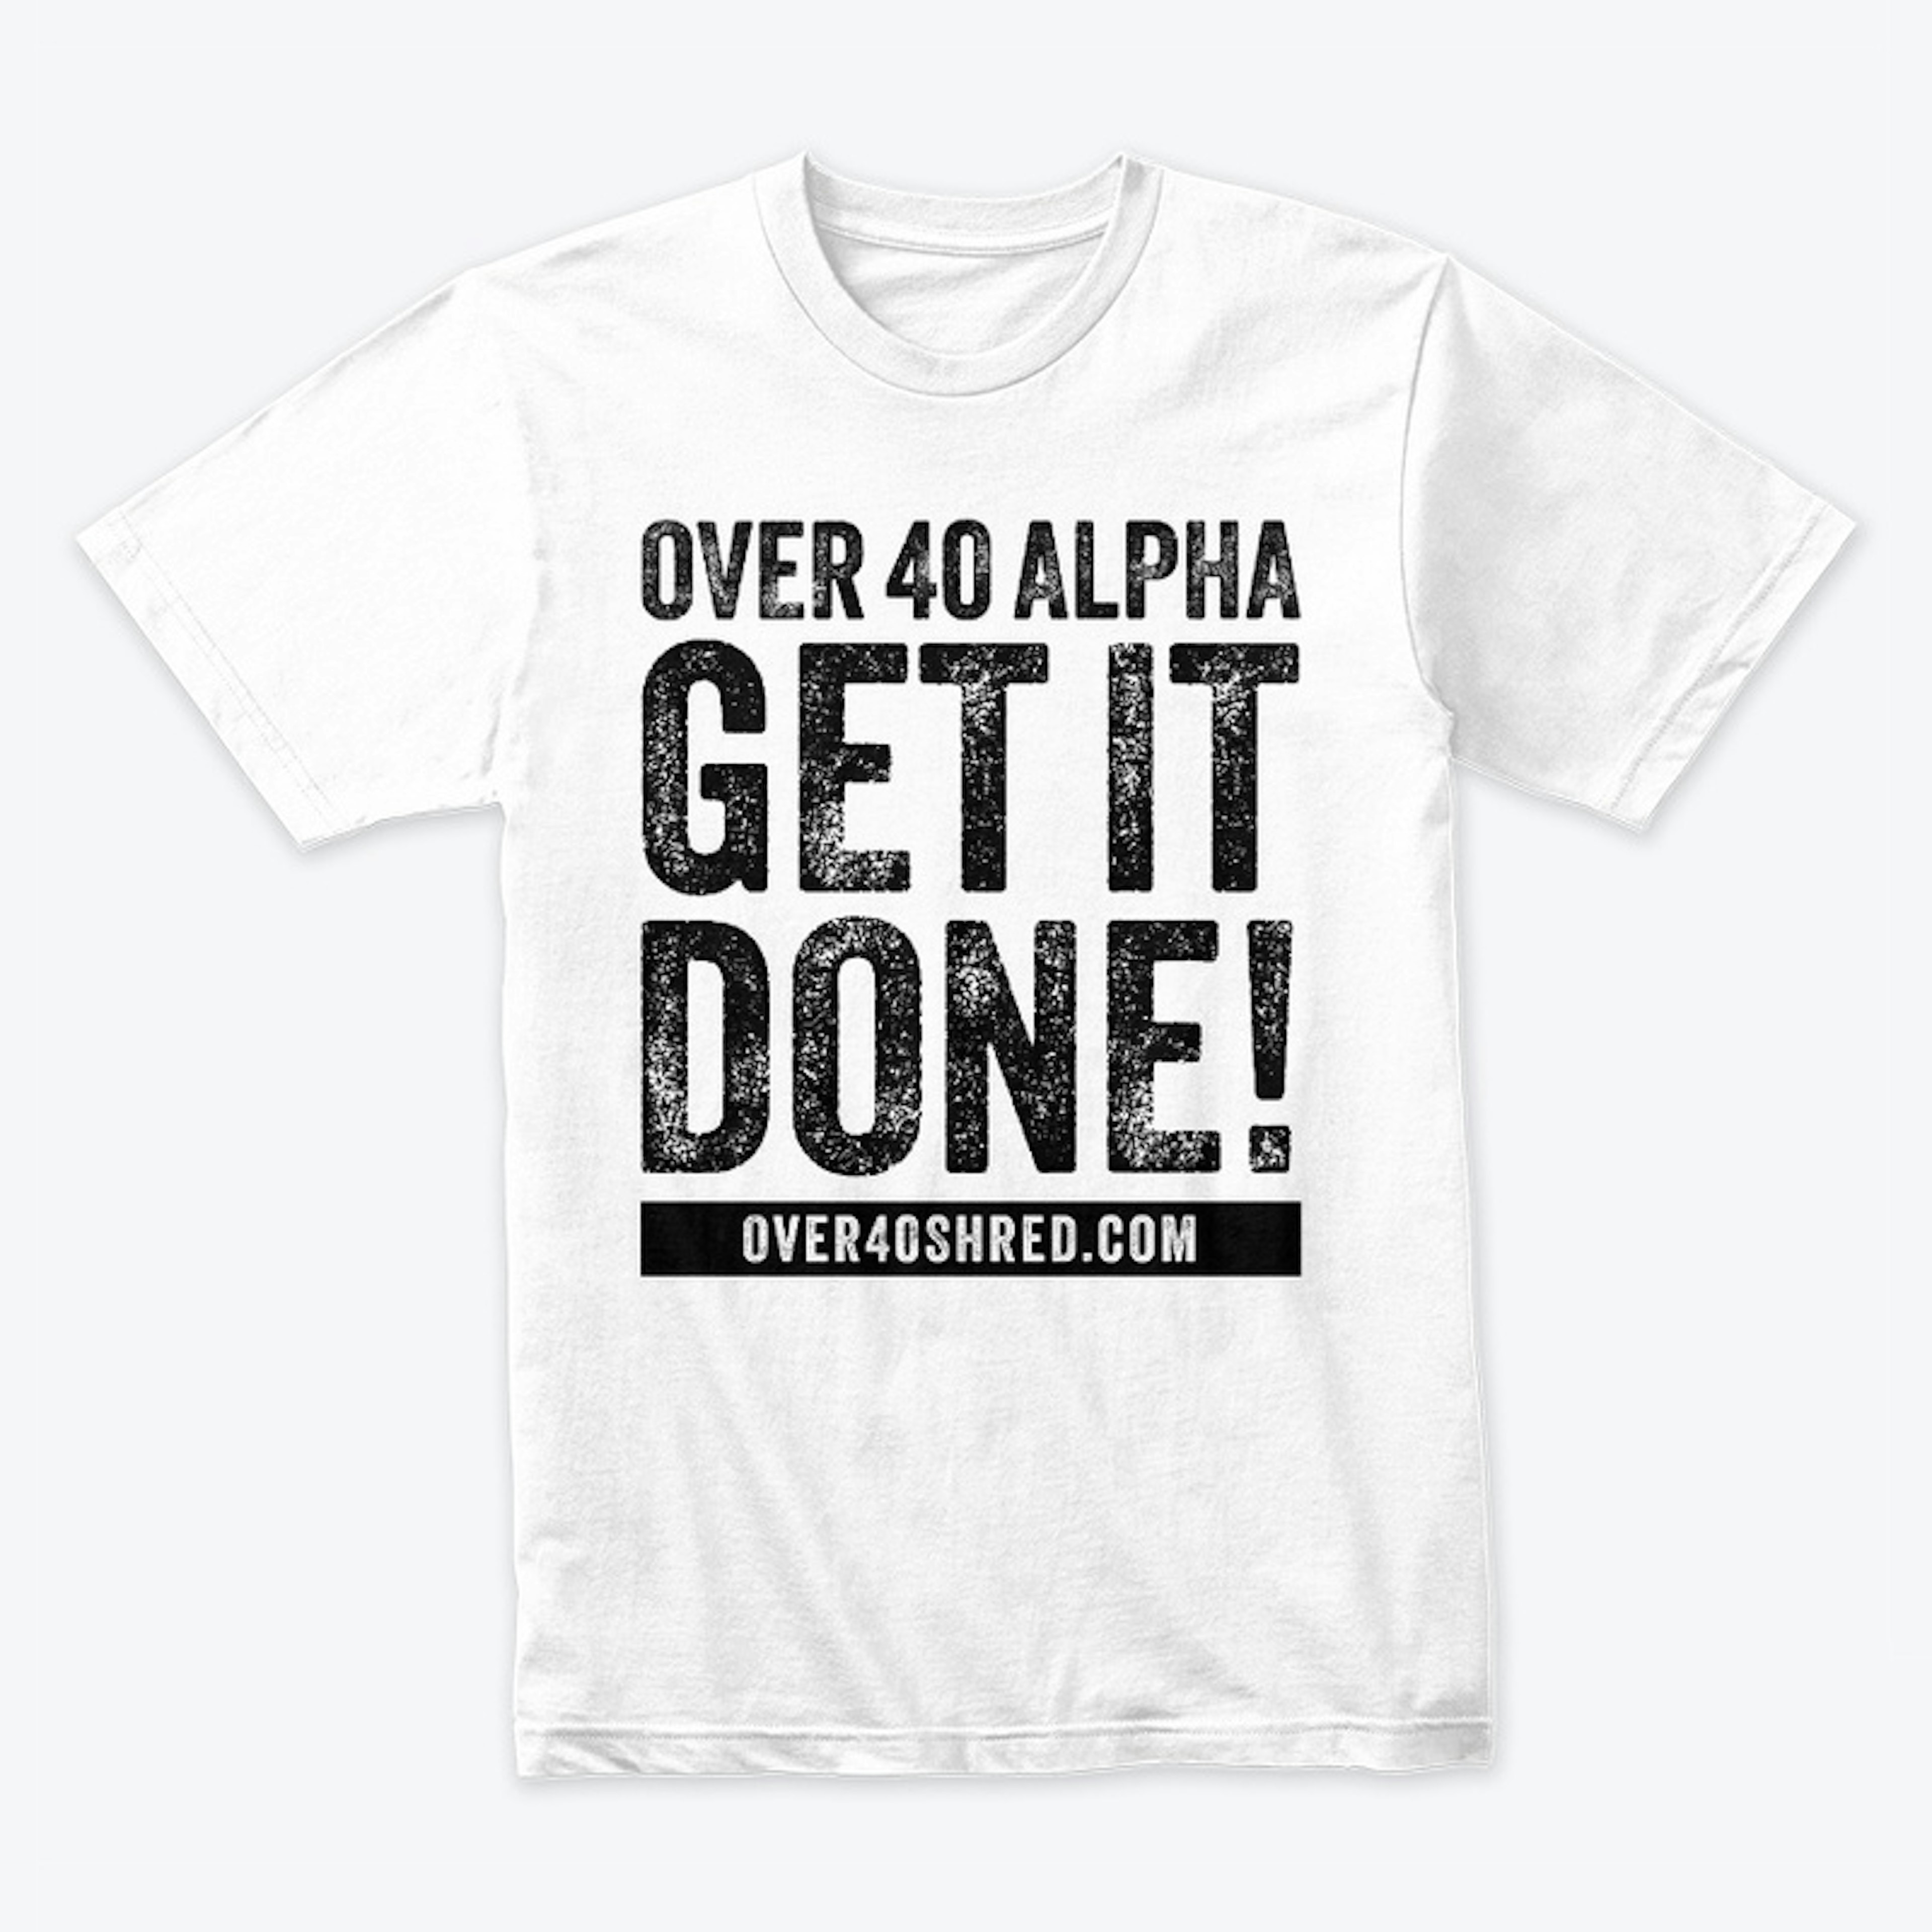 Over 40 Shred - GET IT DONE! Tee